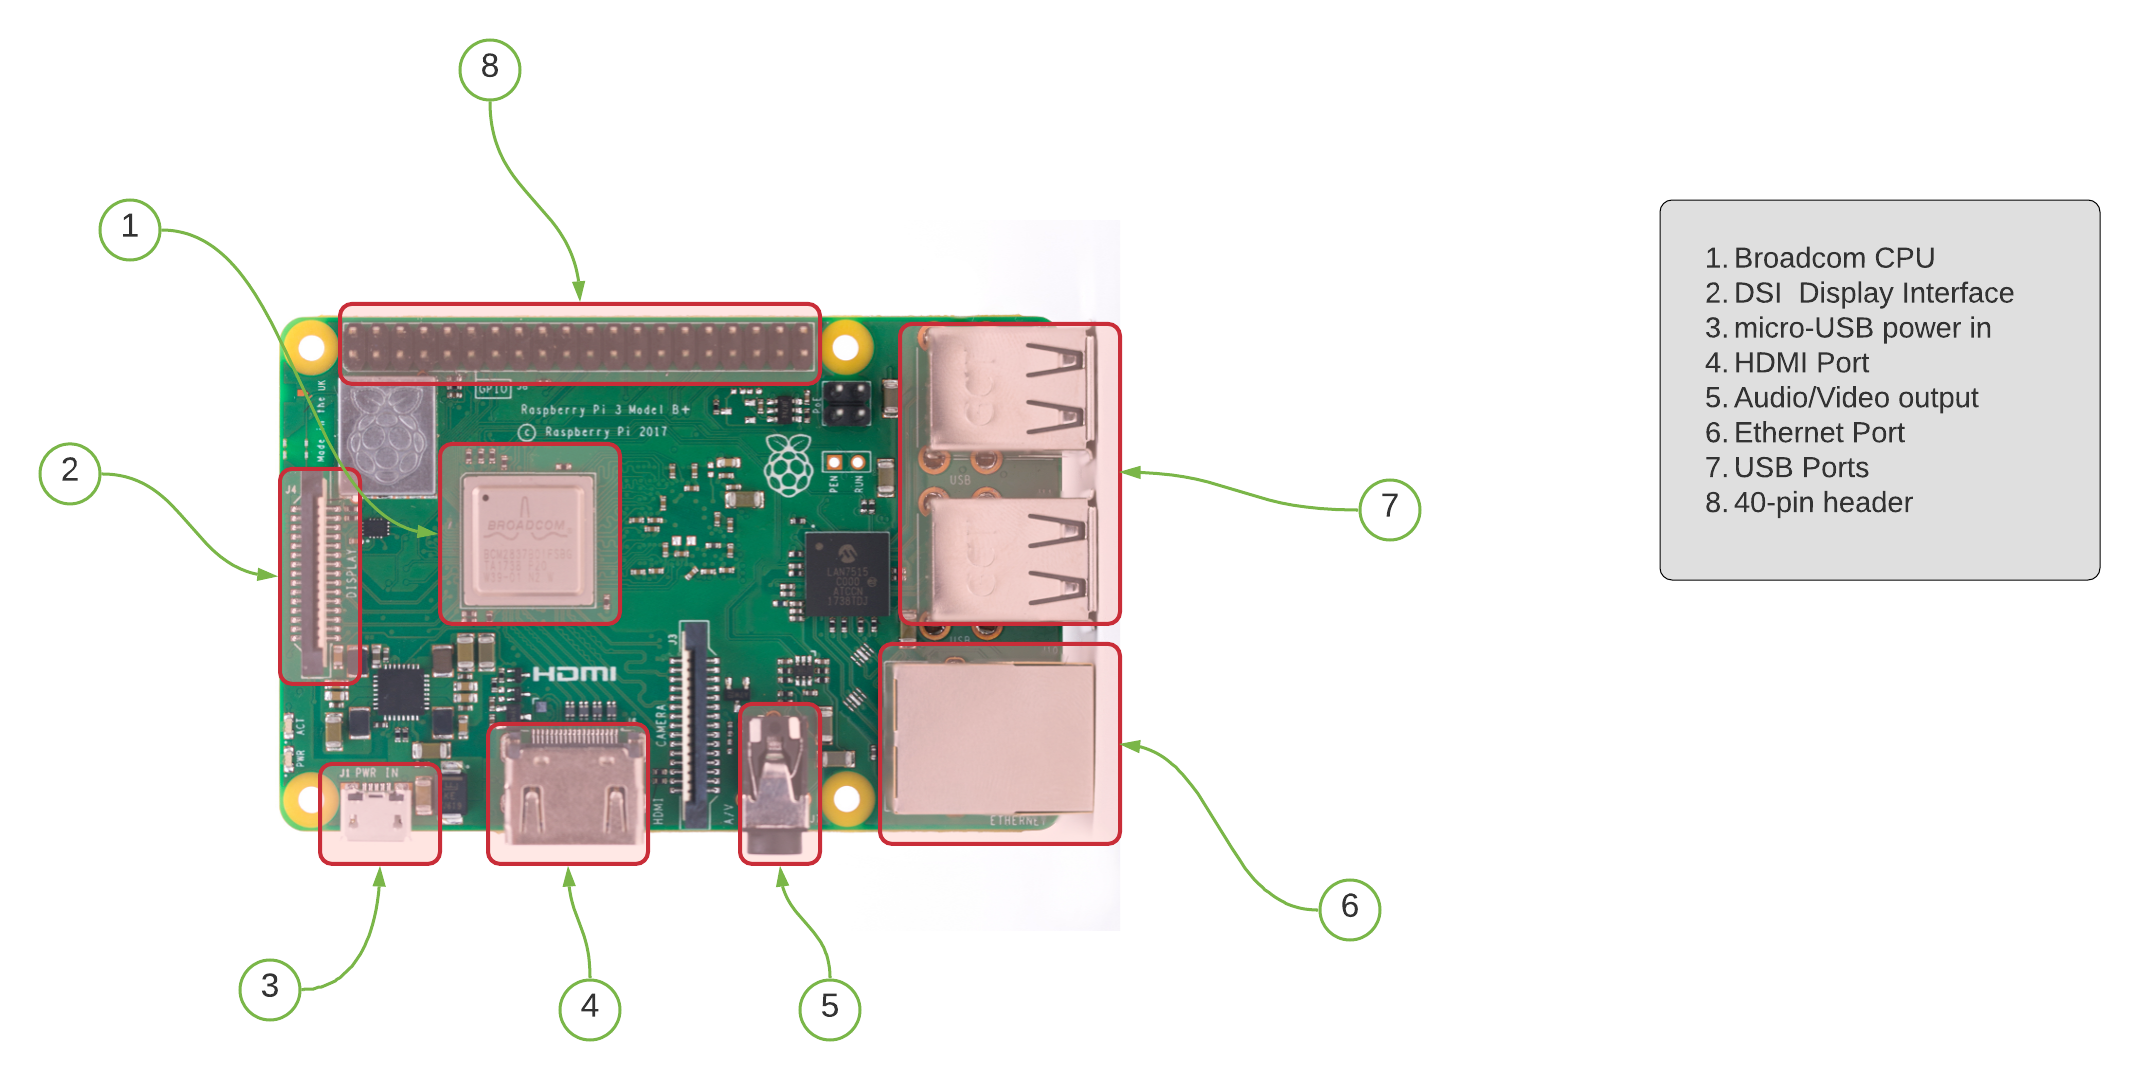 Build a Remote Storage Device with the Raspberry Pi - Circuit Basics